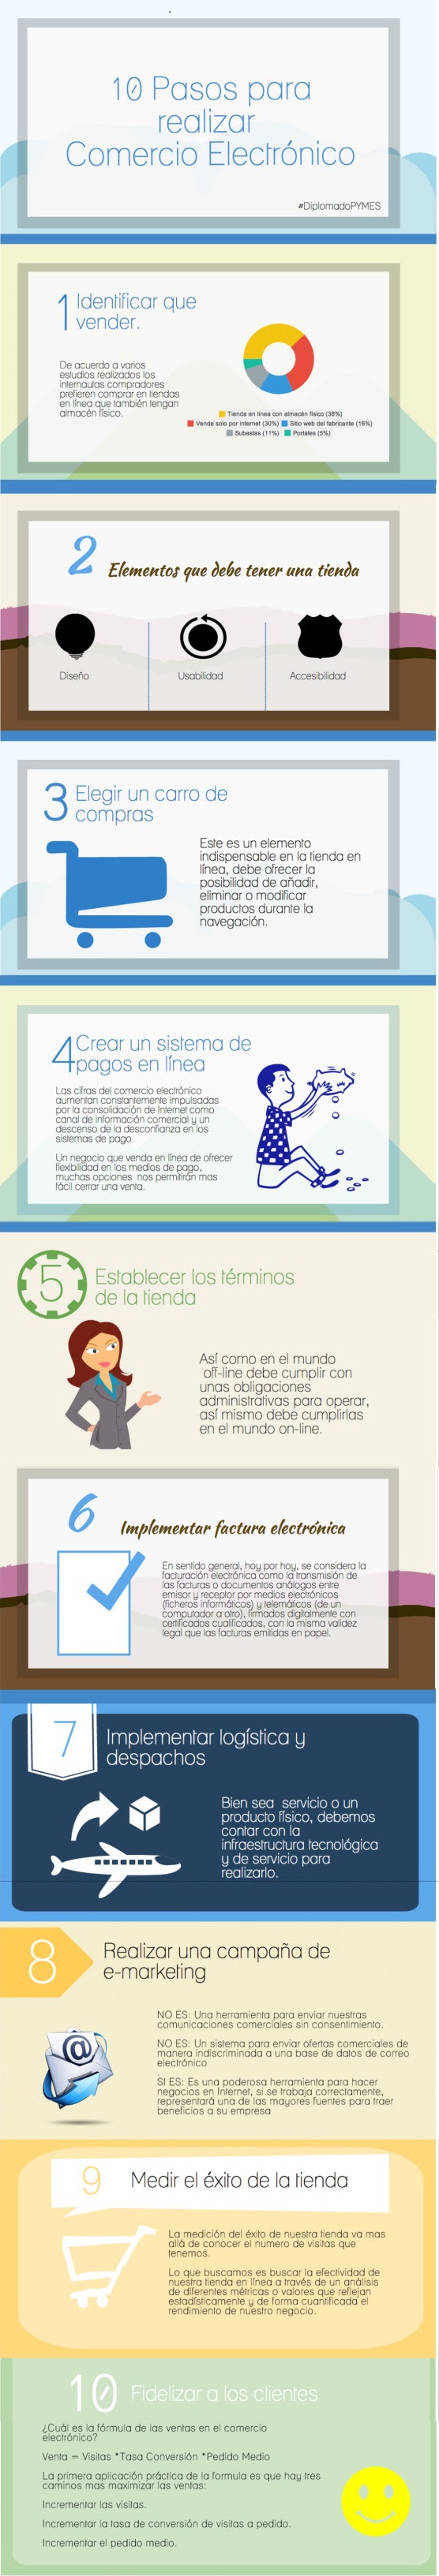 Claves para ecommerce